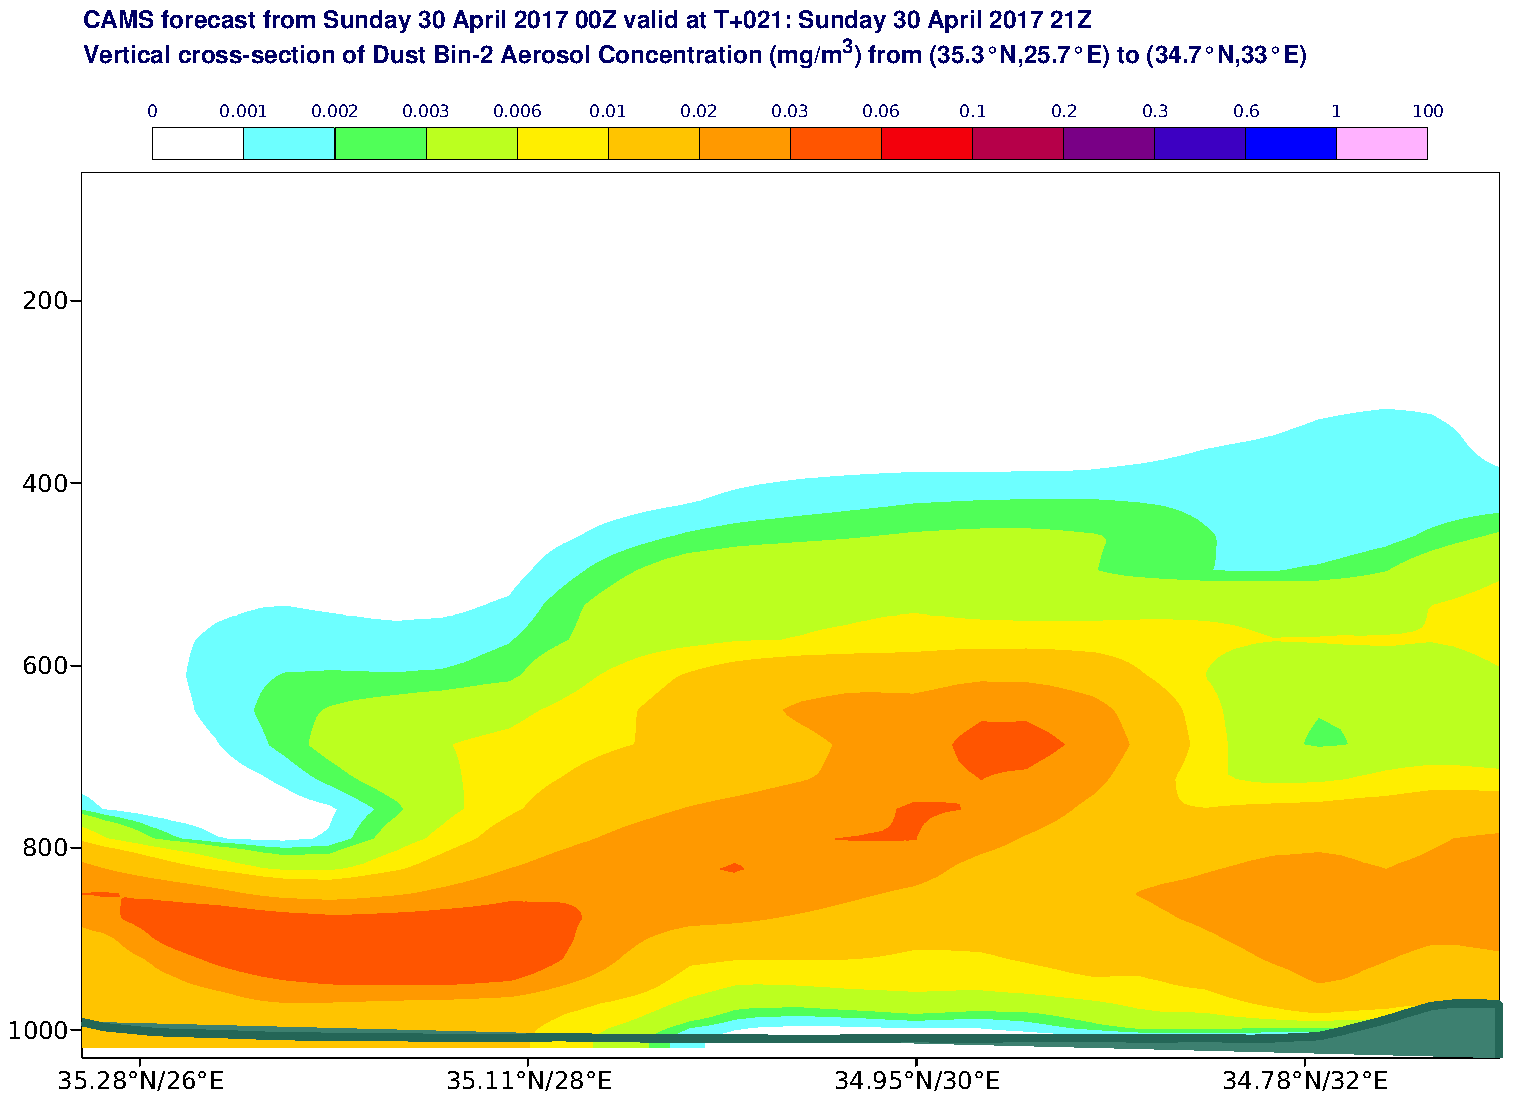 Vertical cross-section of Dust Bin-2 Aerosol Concentration (mg/m3) valid at T21 - 2017-04-30 21:00